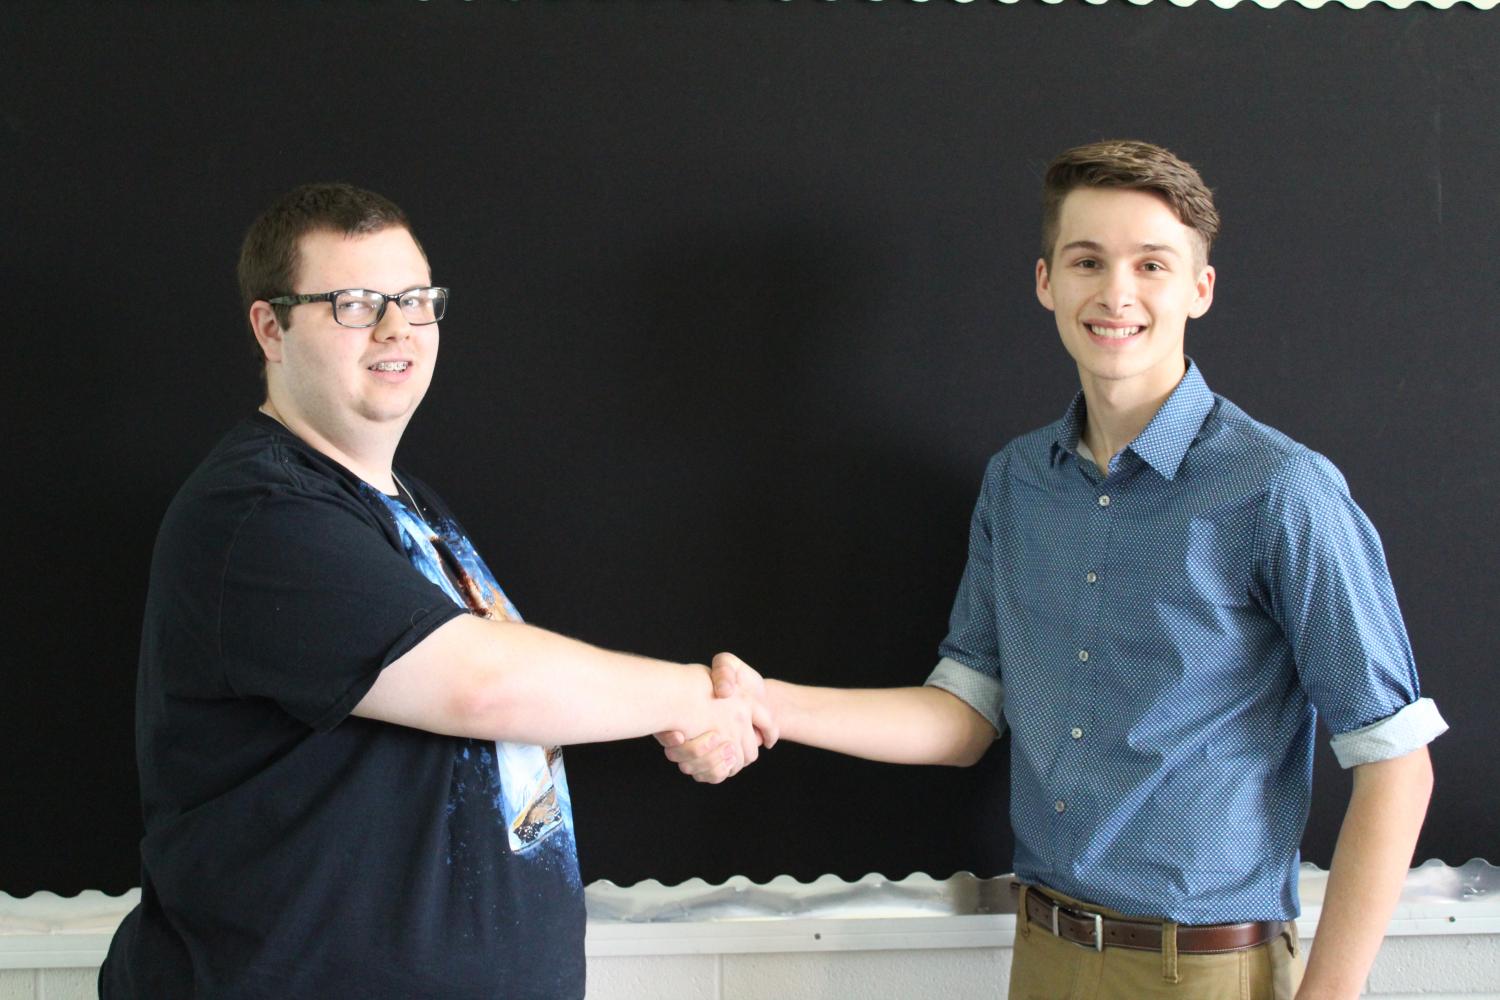 Austin Routt and Cole Bullock, seniors, shake hands respectfully after being voted President and Vice President of SODA club.